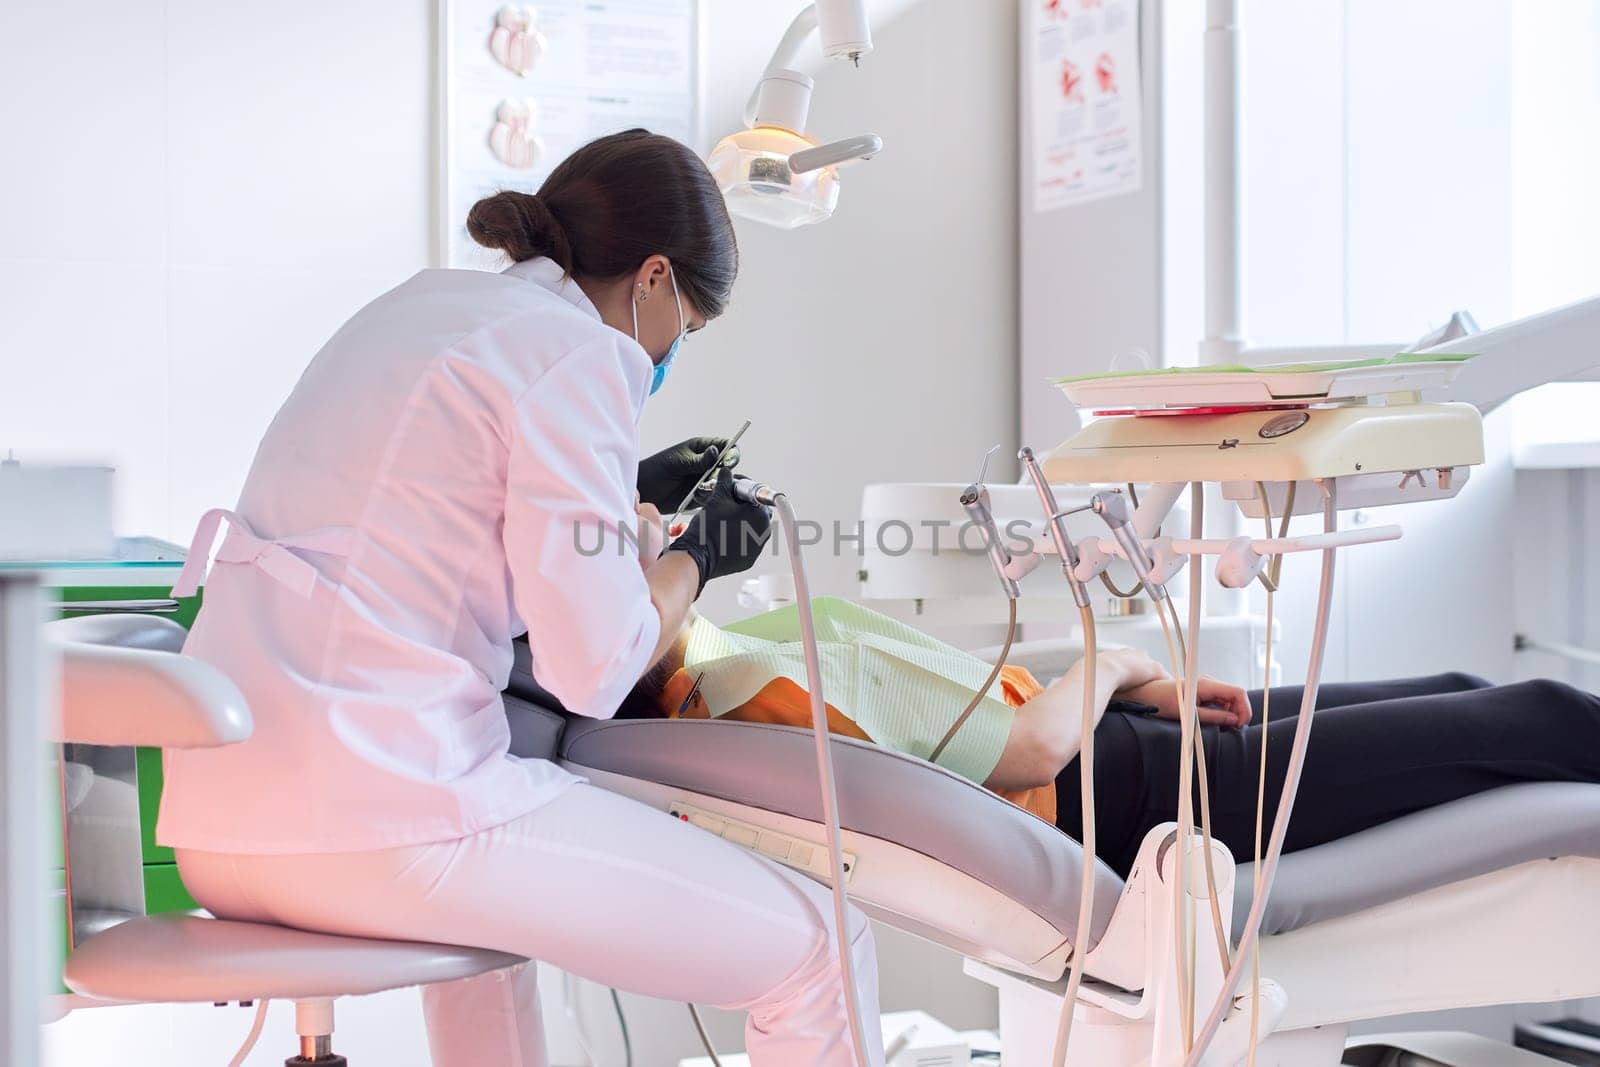 Dental treatment at the dental clinic, female doctor treating patient.